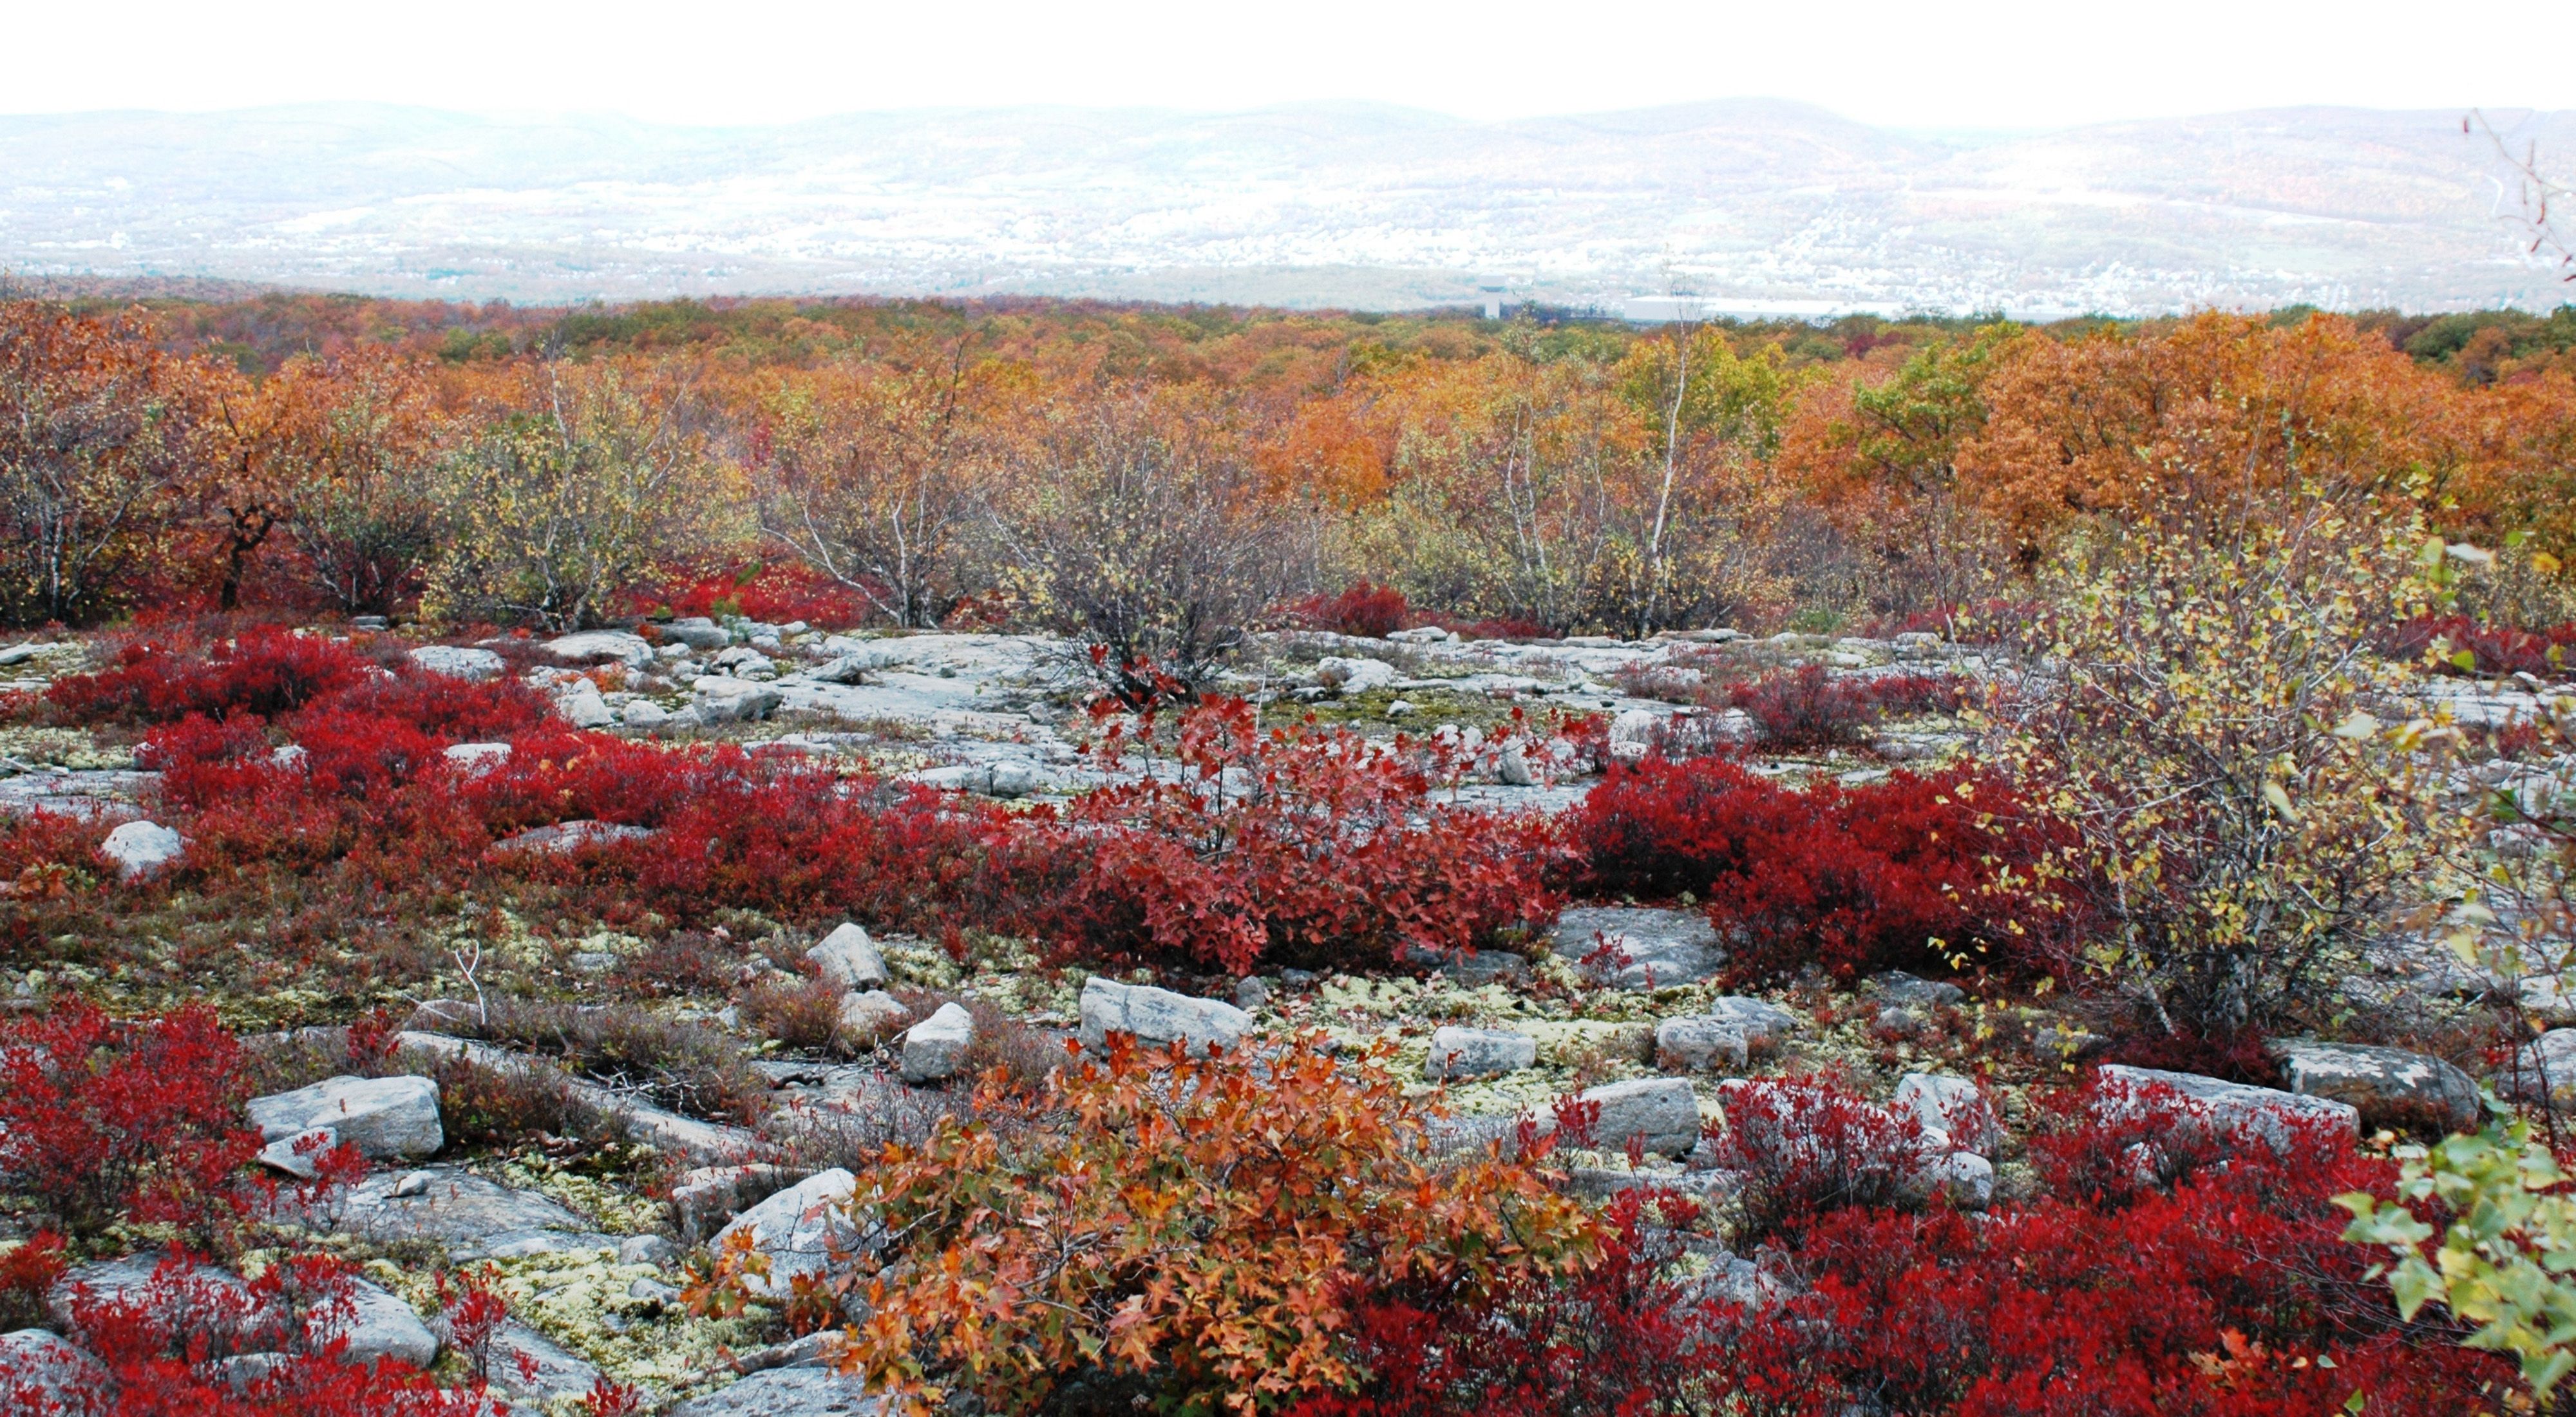 Colorful shrubs surround a rocky landscape. Low, bright red bushes grow in between the flat gray rocks of an open plateau. The tops of trees leafed out in bright orange line the background.